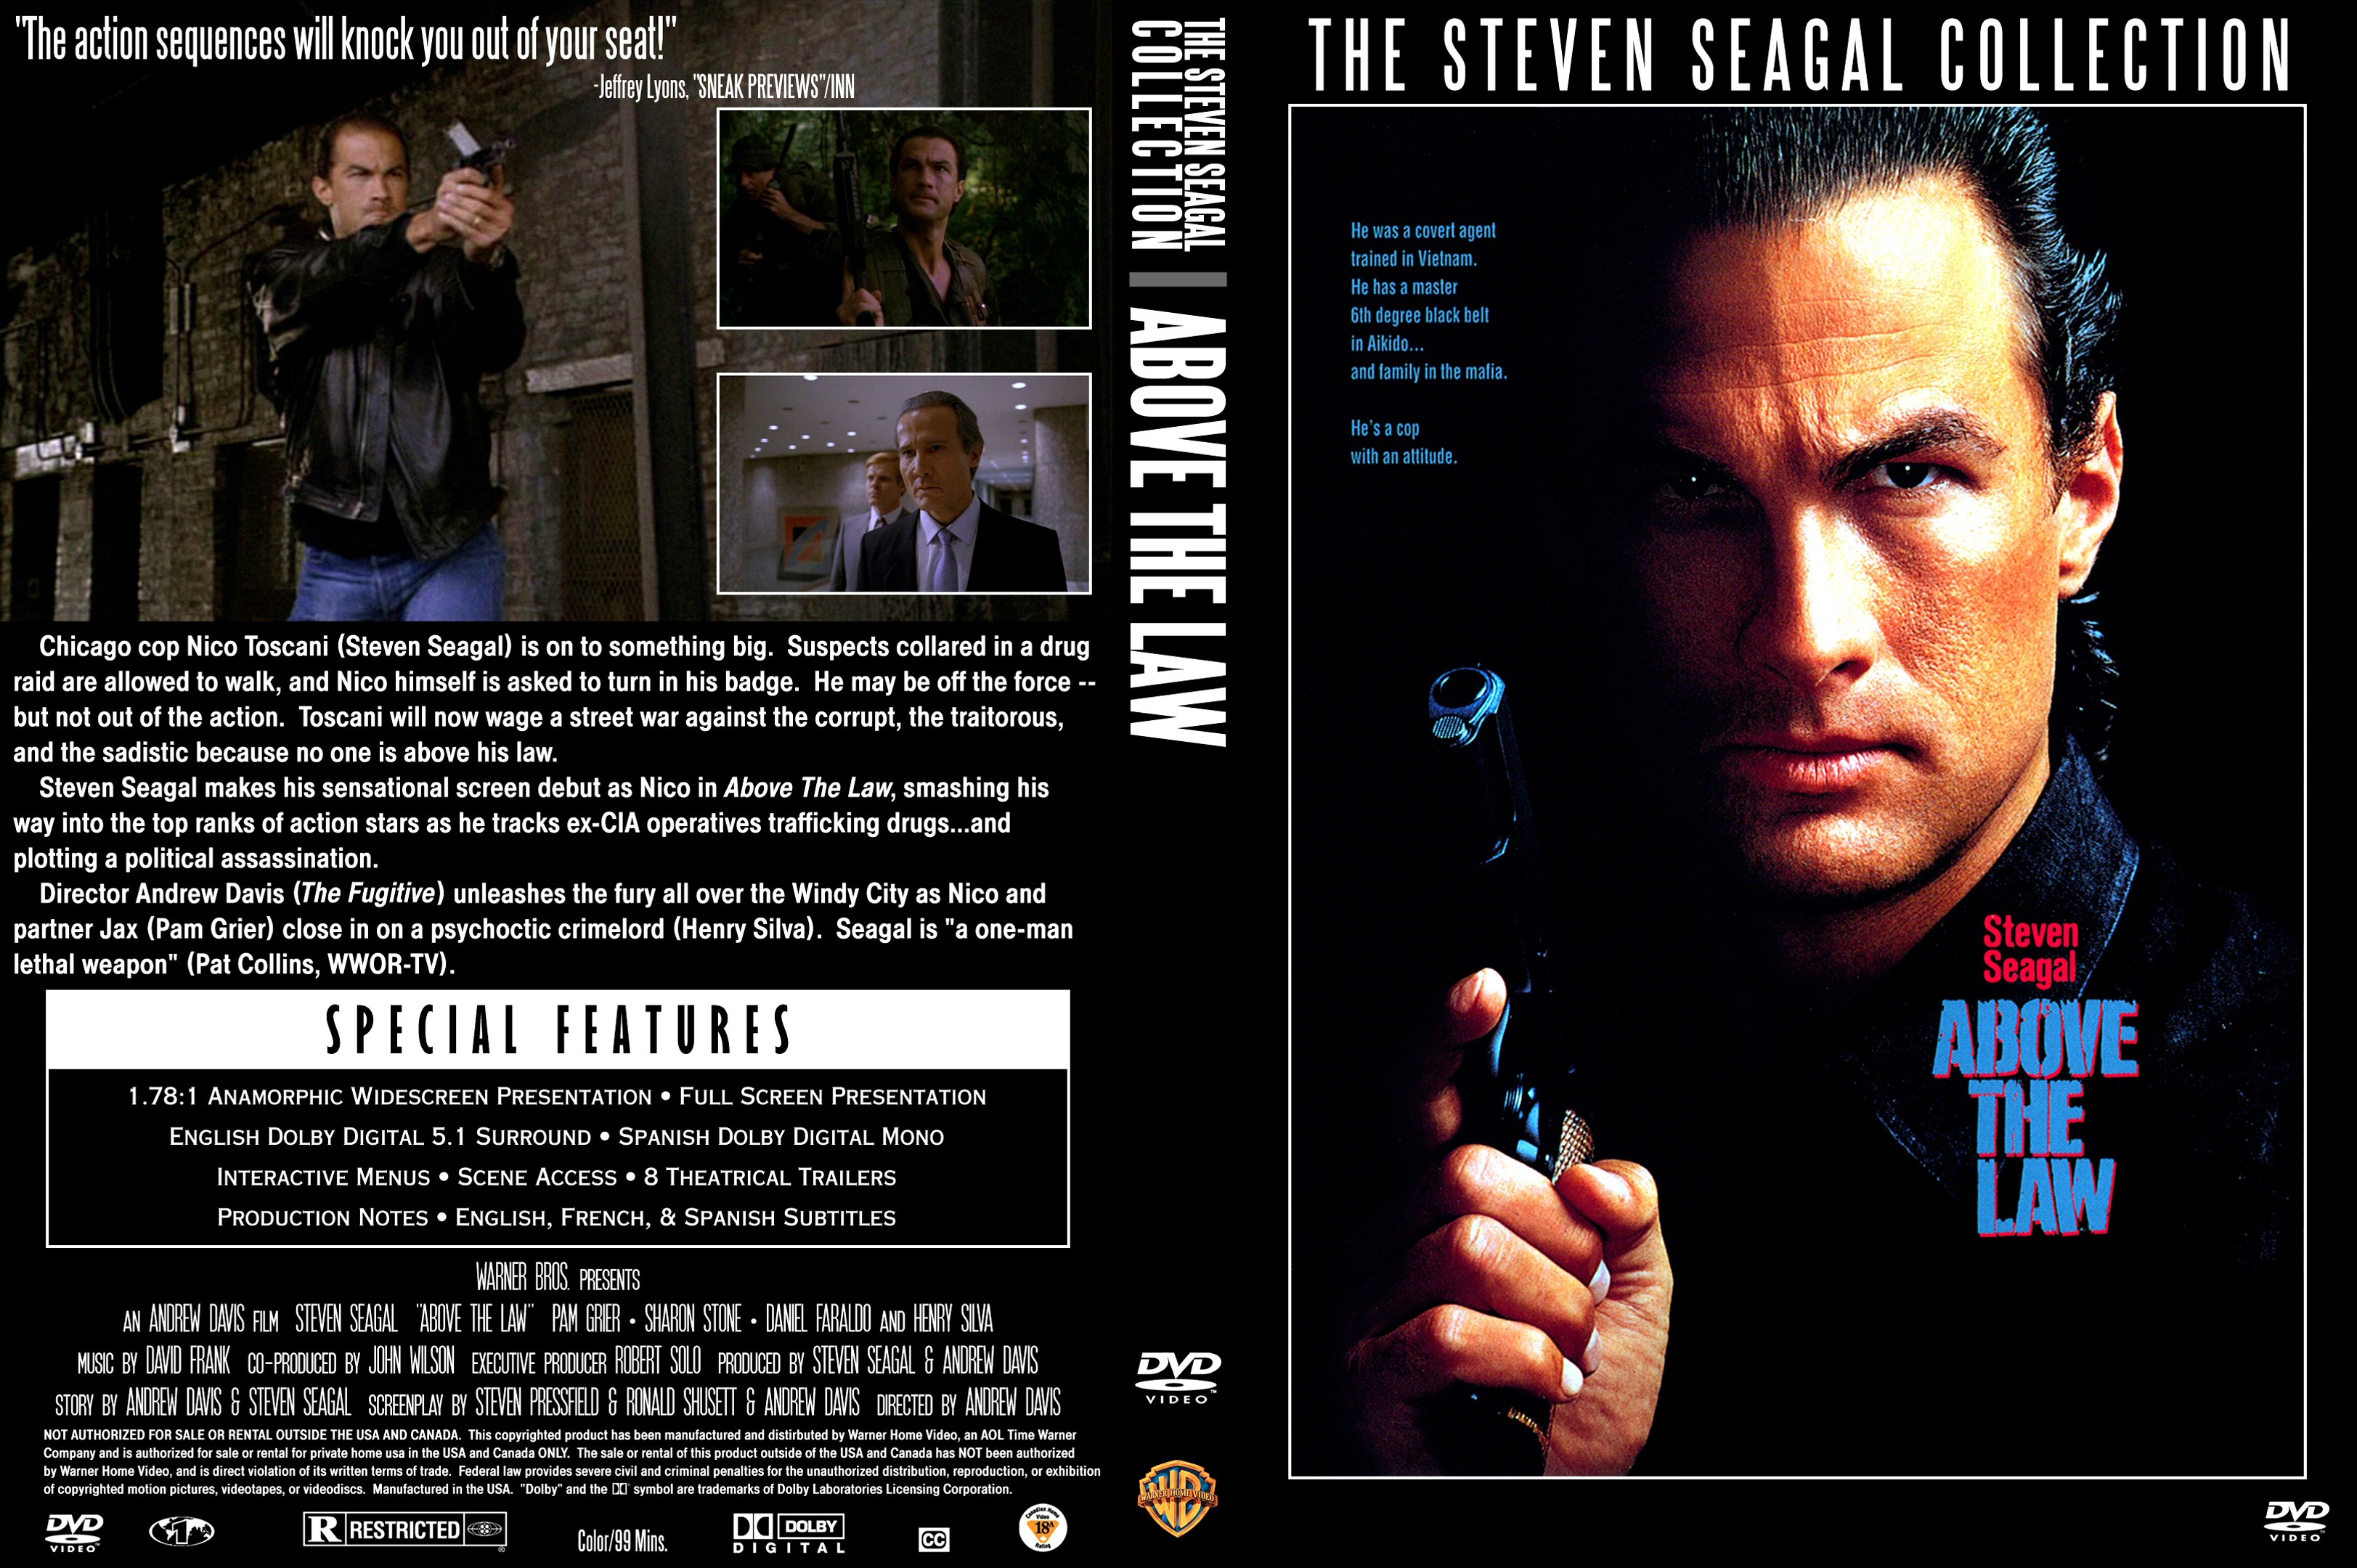 Above the law (1988) Steven Seagal